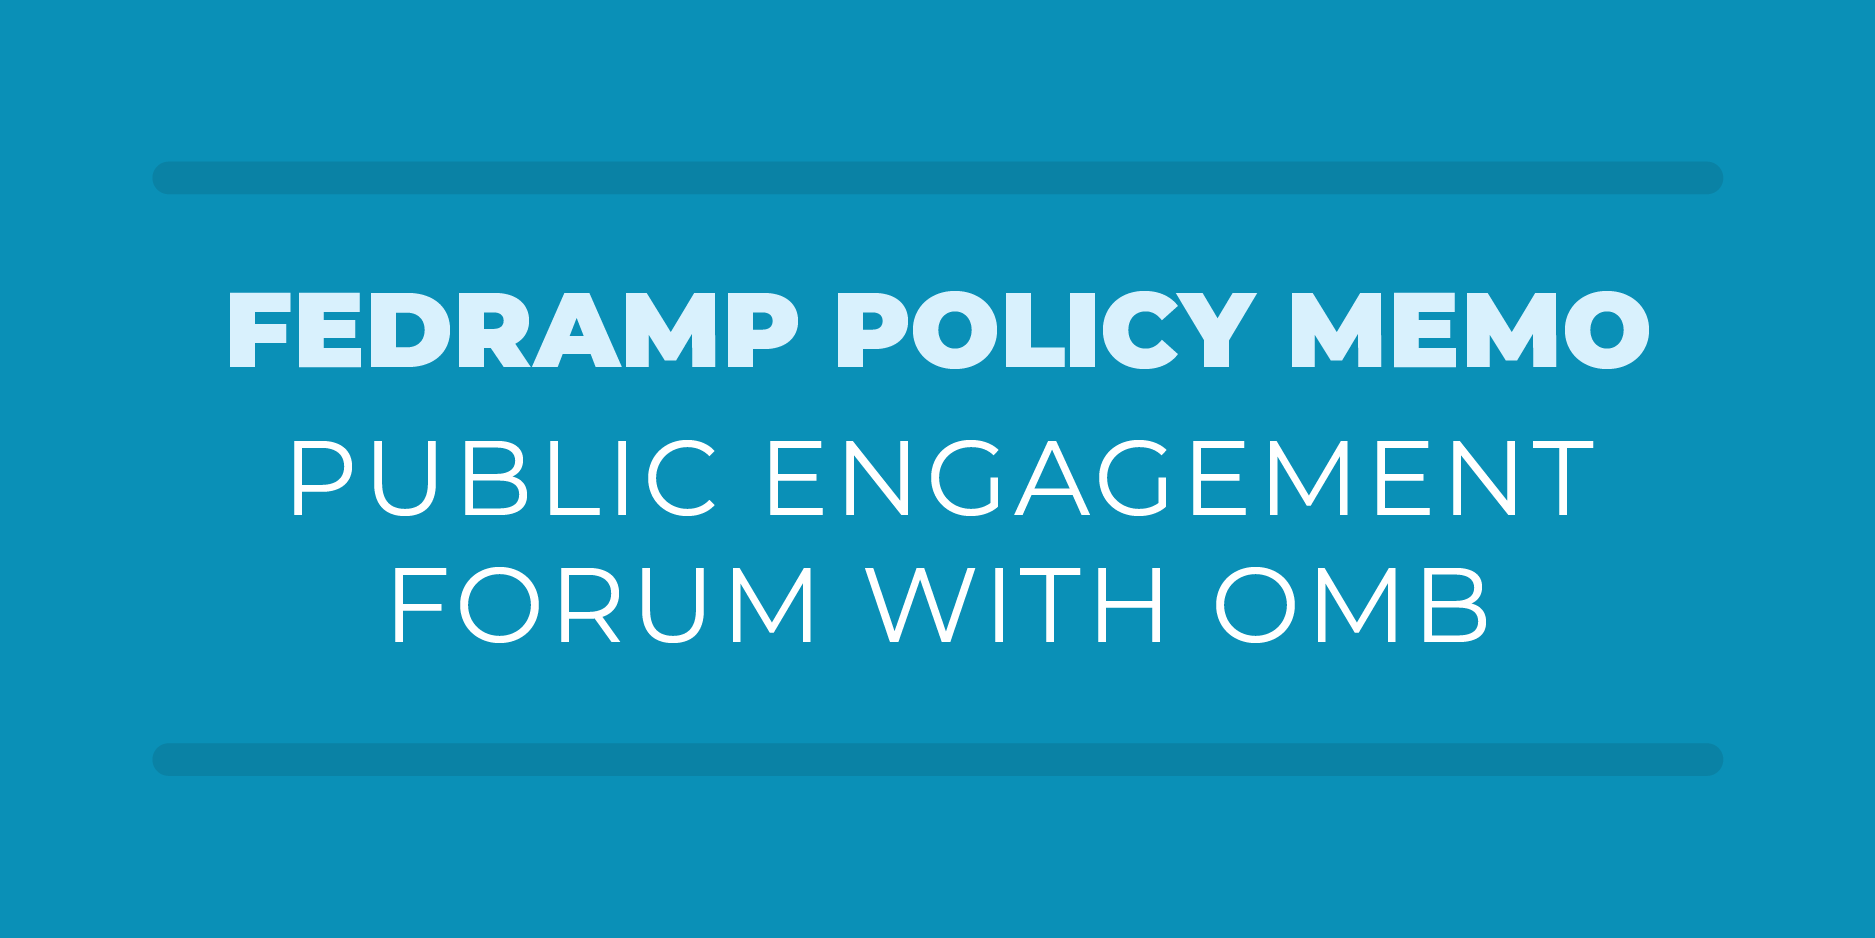 FedRAMP Policy Memo Public Engagement Forum with OMB